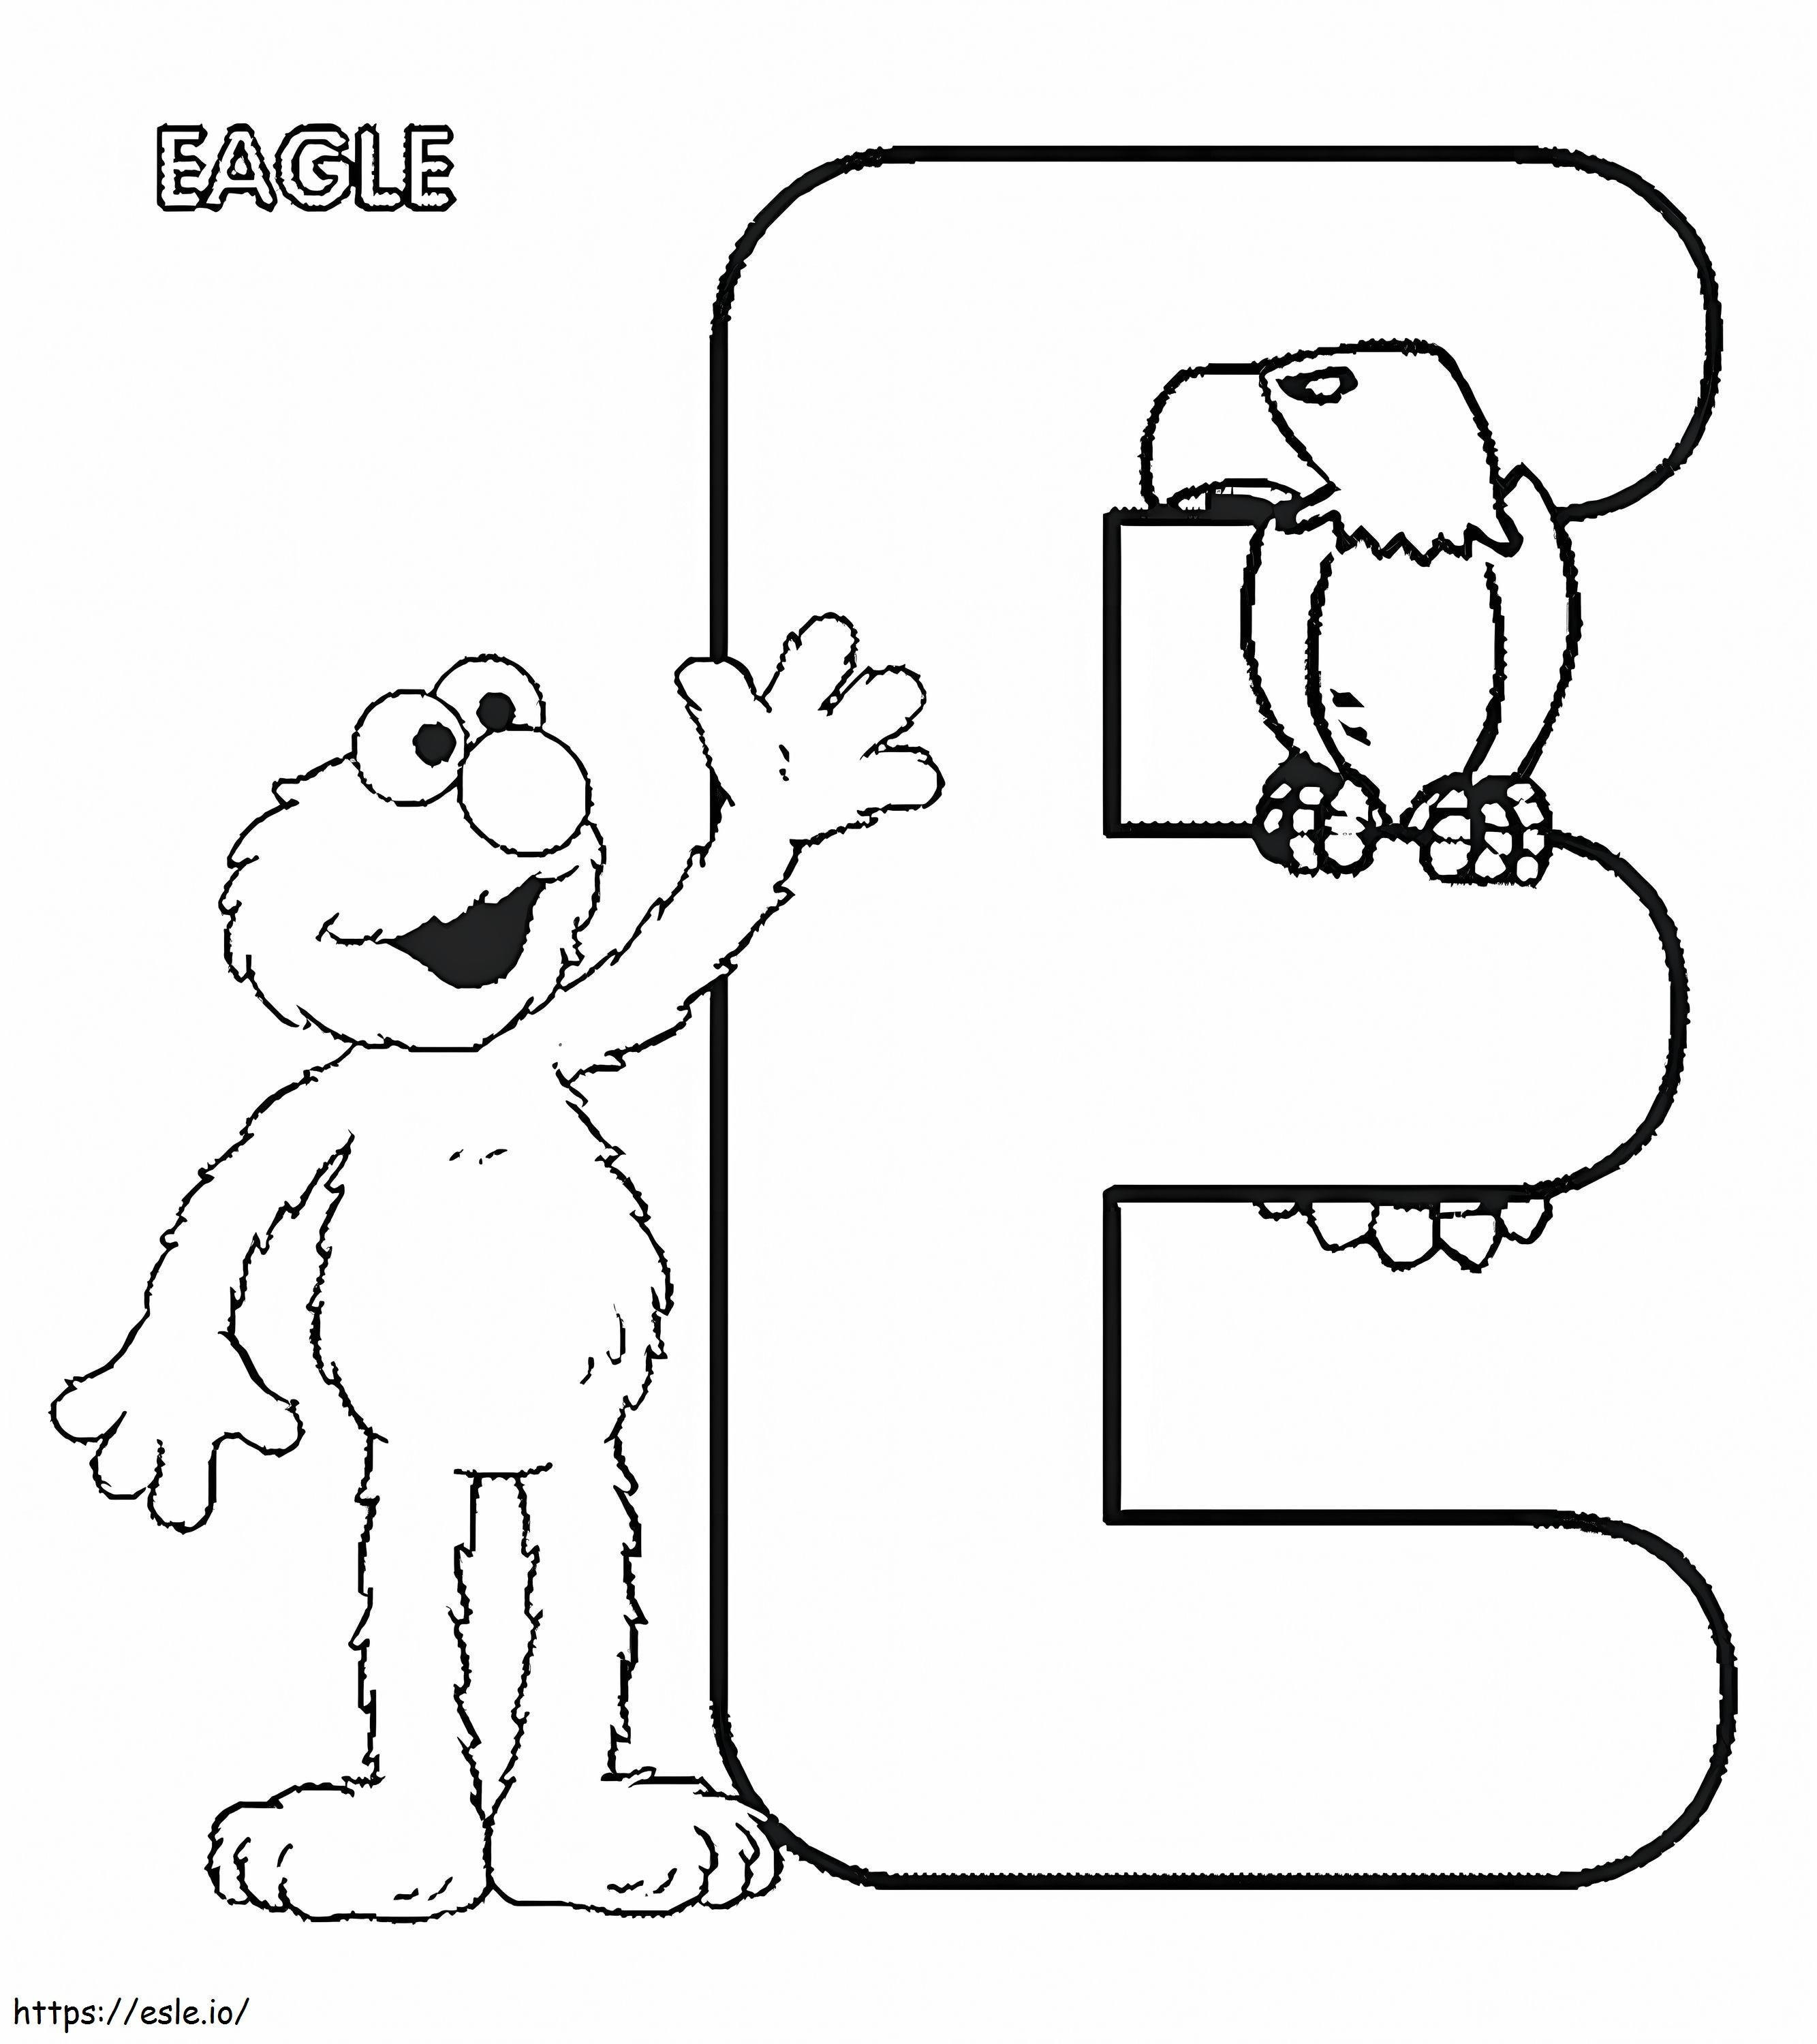 E For Elmo And Eagle coloring page